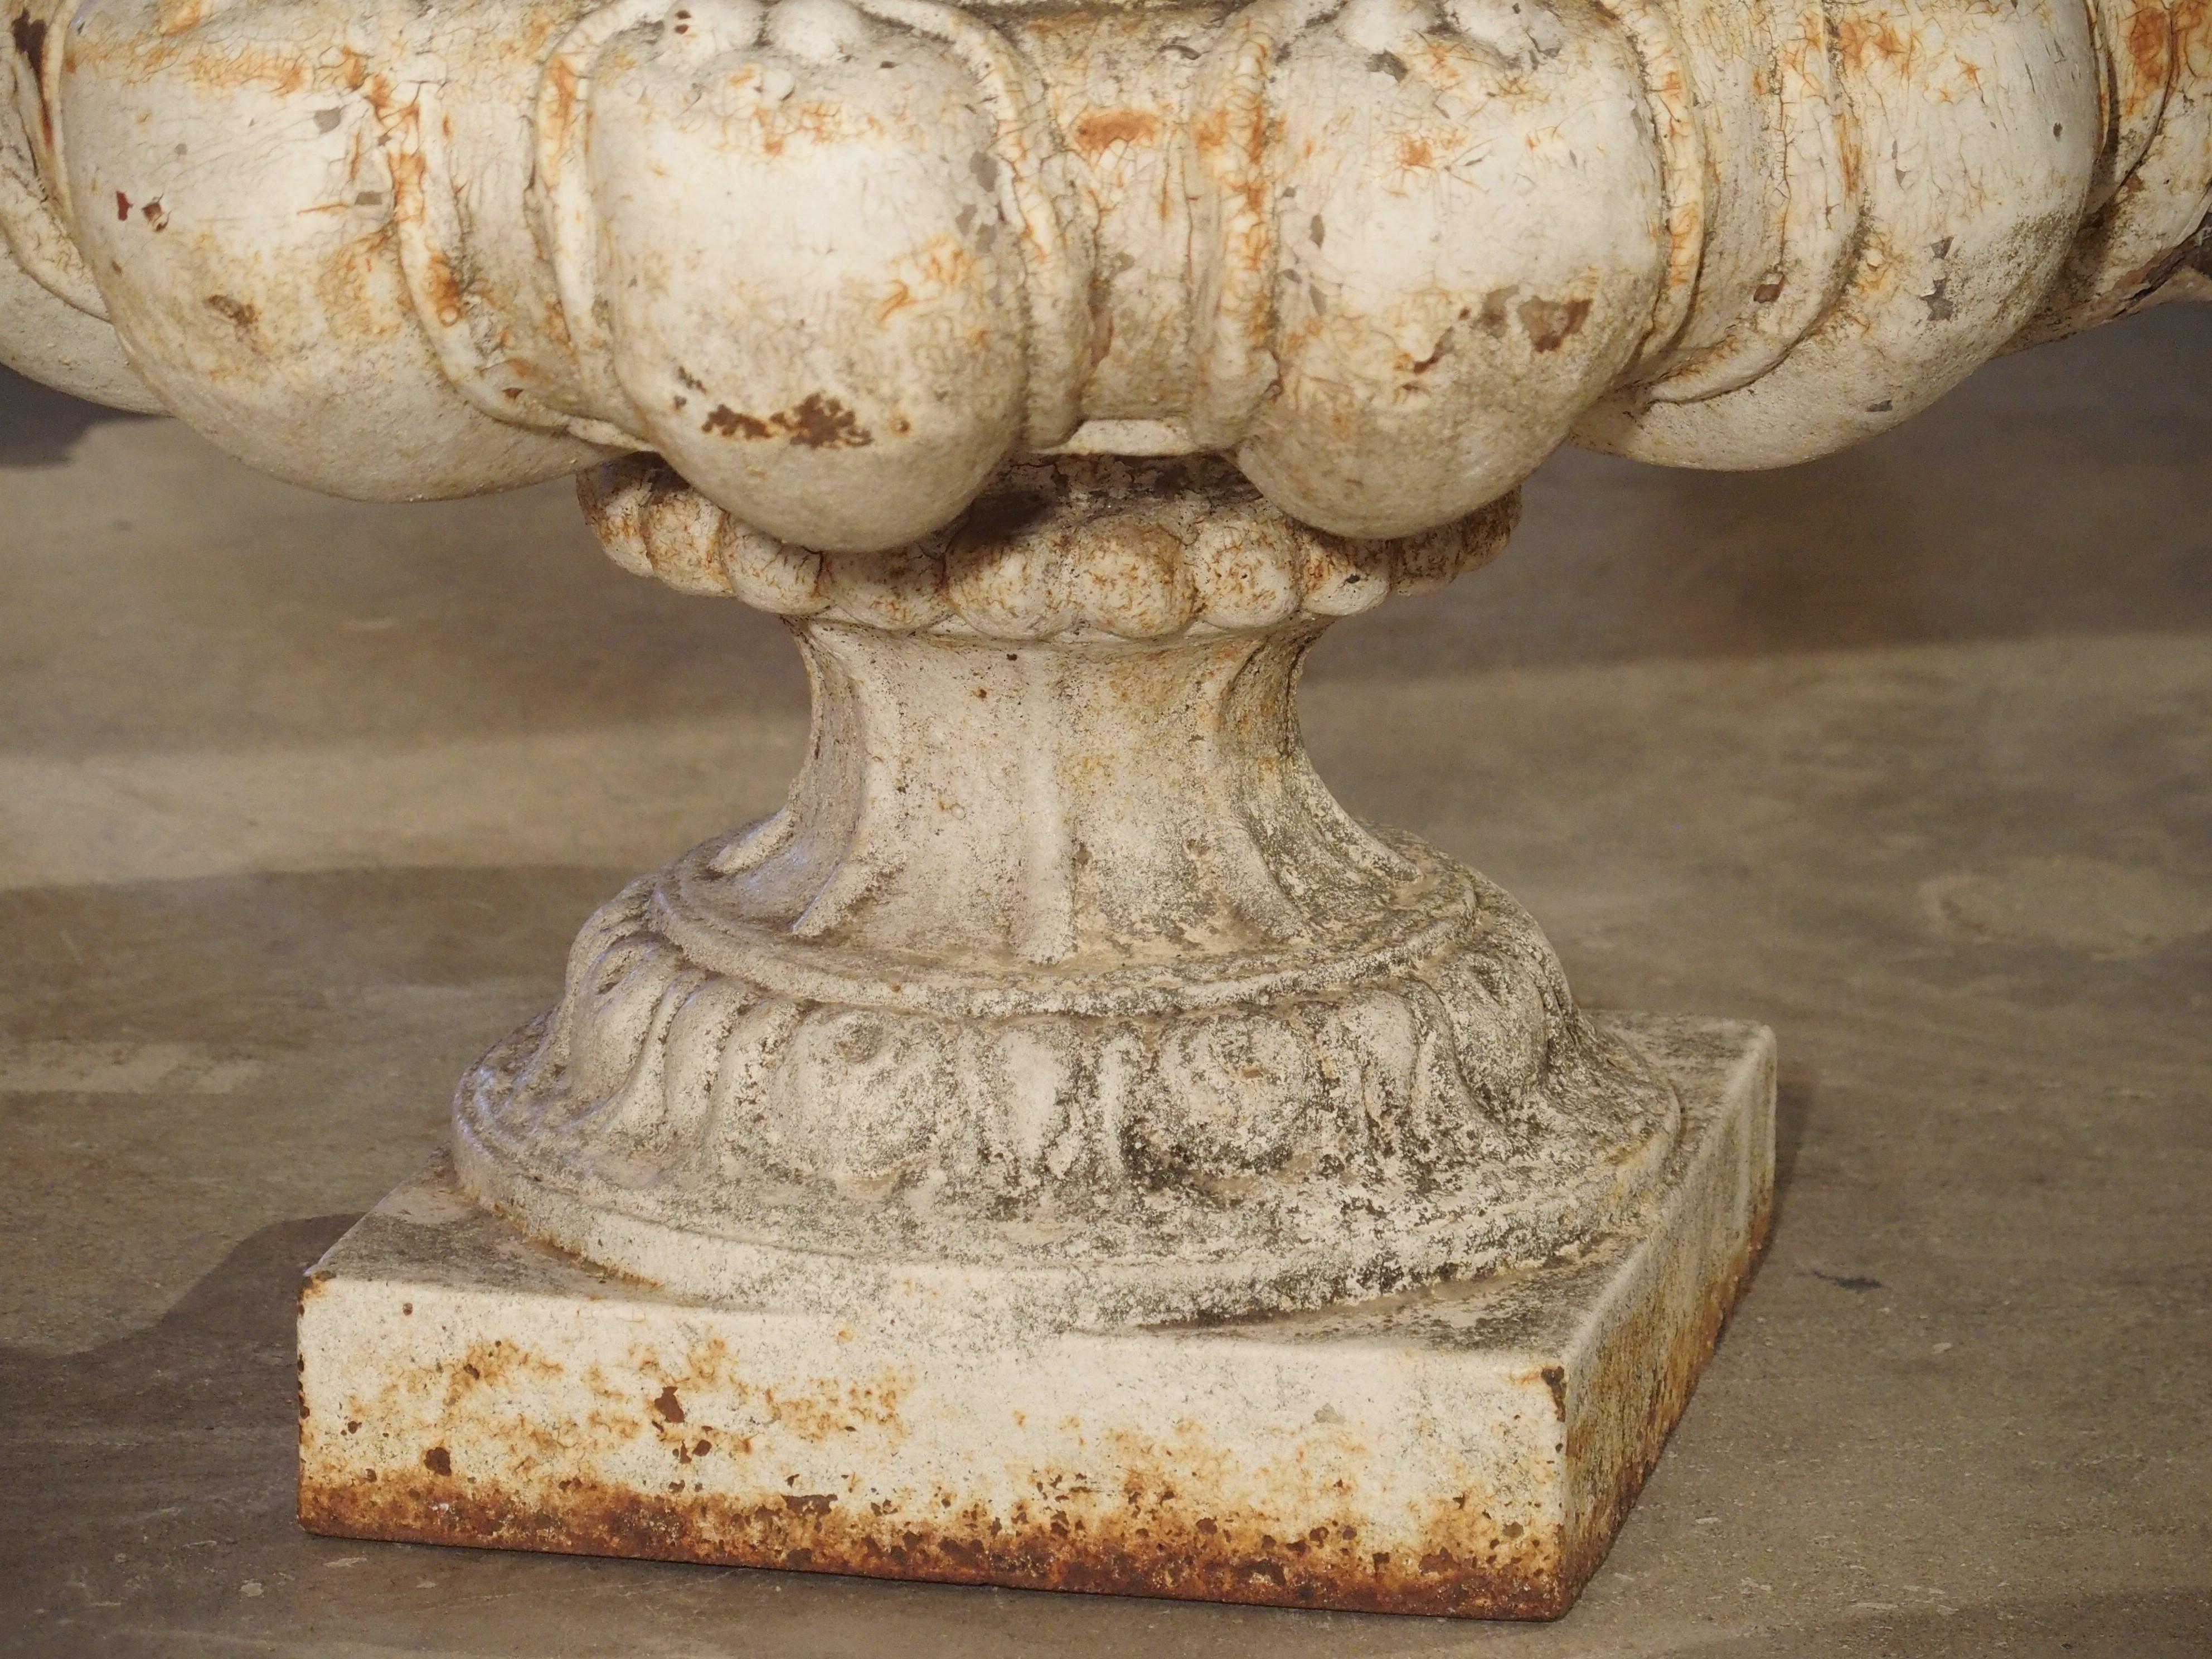 This pair of large cast iron English vases have been painted white and are from the early 1900’s. The diameter of the vase openings are 18 inches, allowing for a large floral or greenery display. Maximum width is just over 3 feet.

The handles of